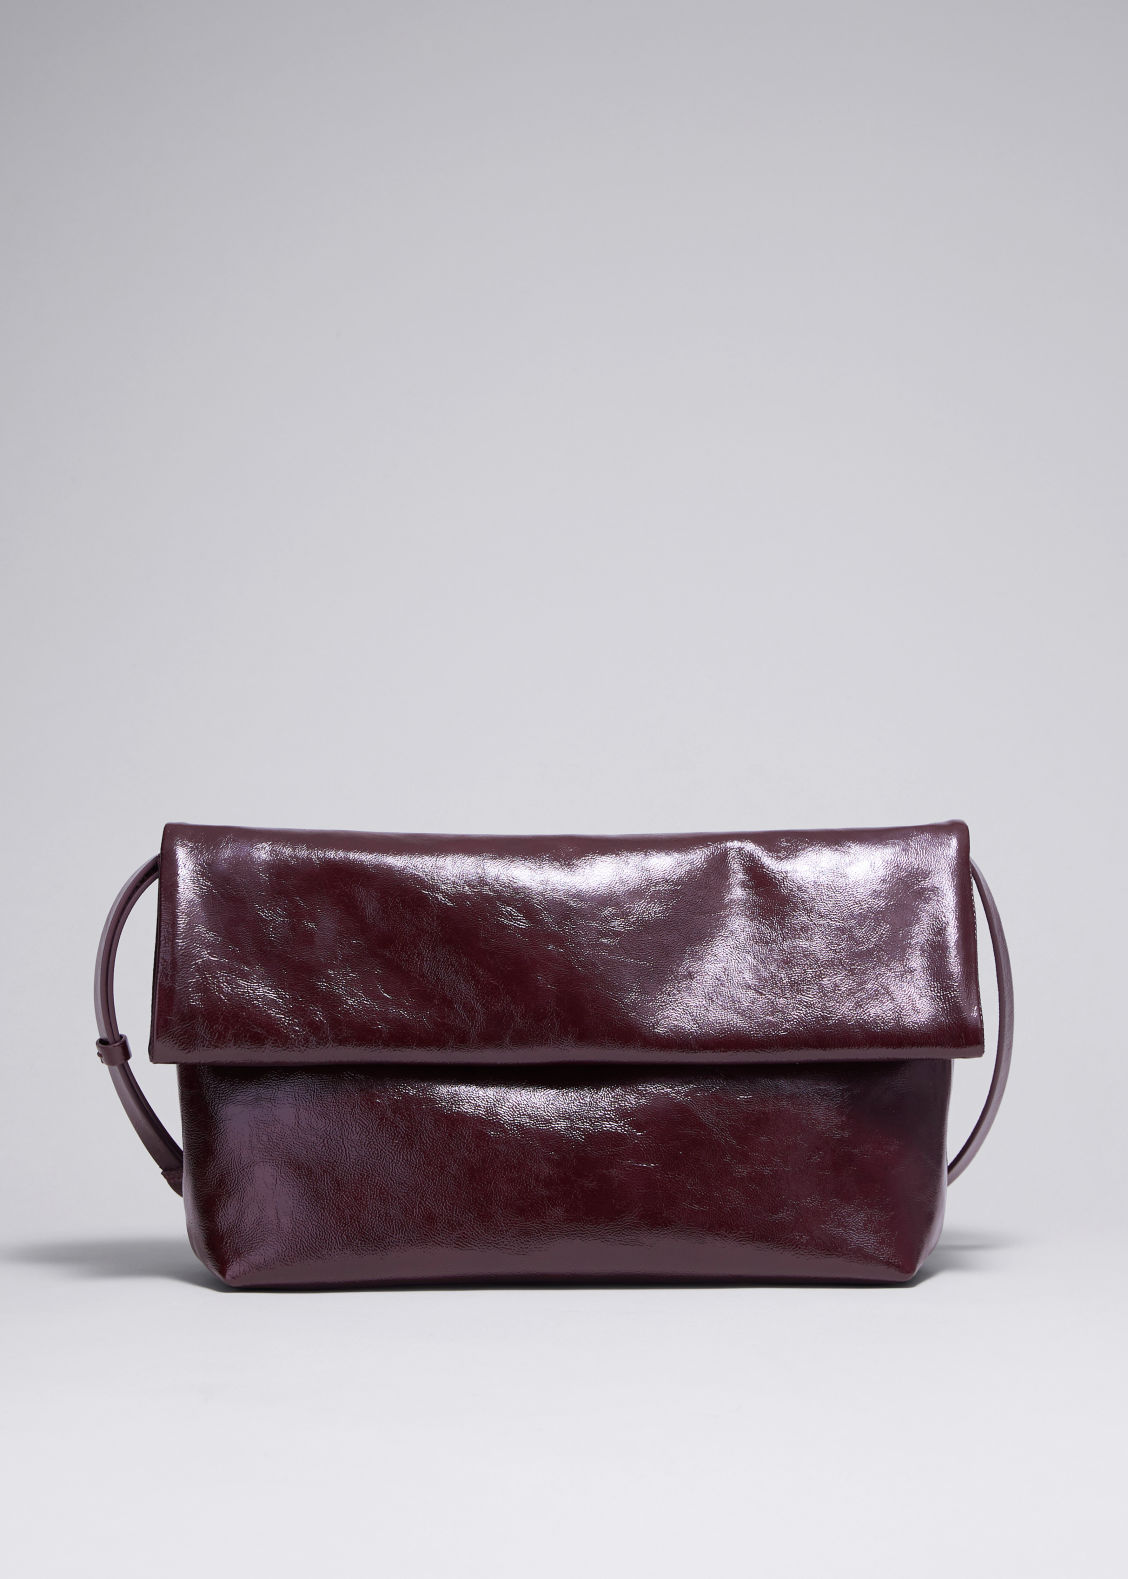 Folded Leather Clutch